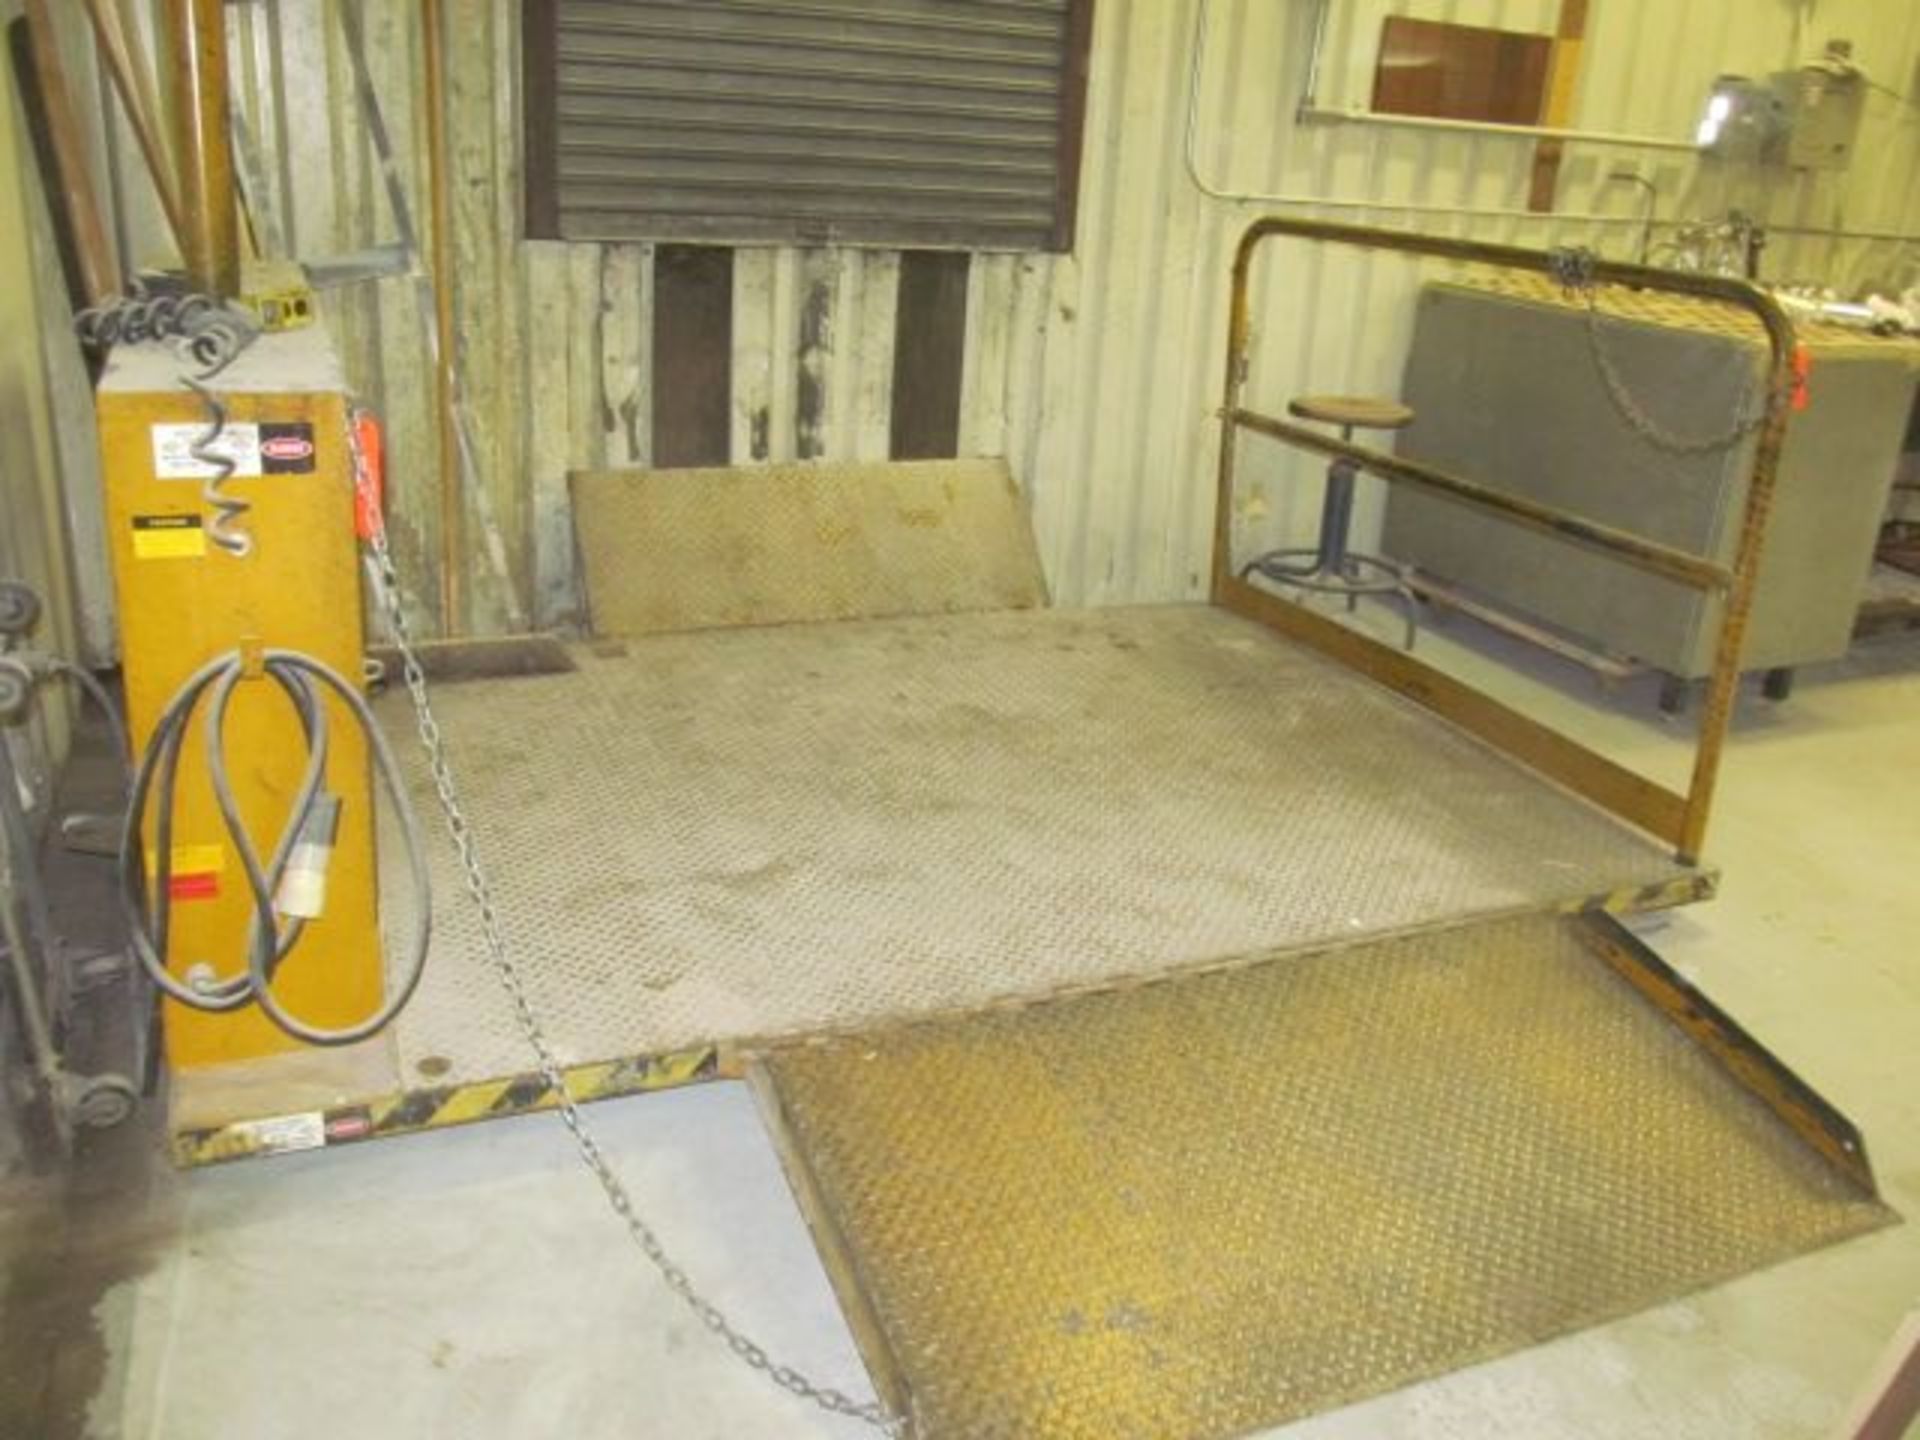 Electric hydraulic platform lift, Make unknown, 8' X 6', with 4'H cap, with ramp and safety rail - Image 2 of 2